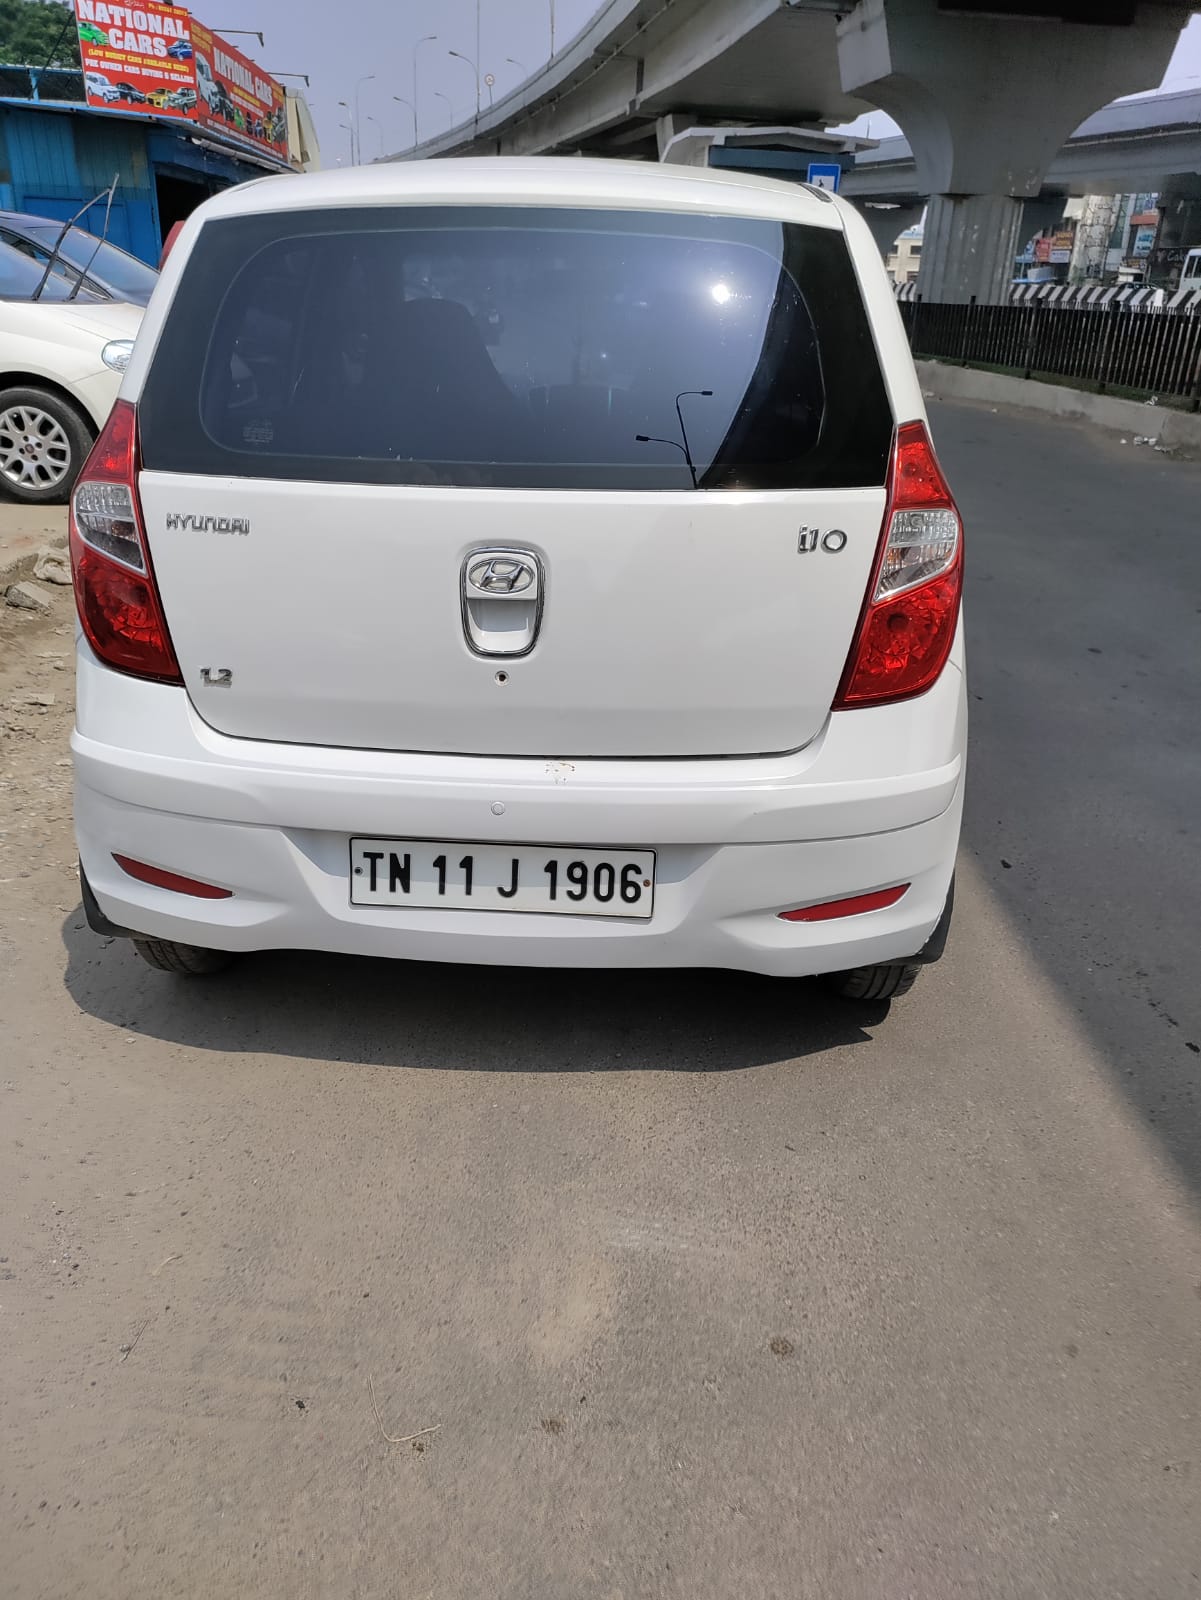 3833-for-sale-Hyundai-i10-Petrol-Second-Owner-2014-TN-registered-rs-270000